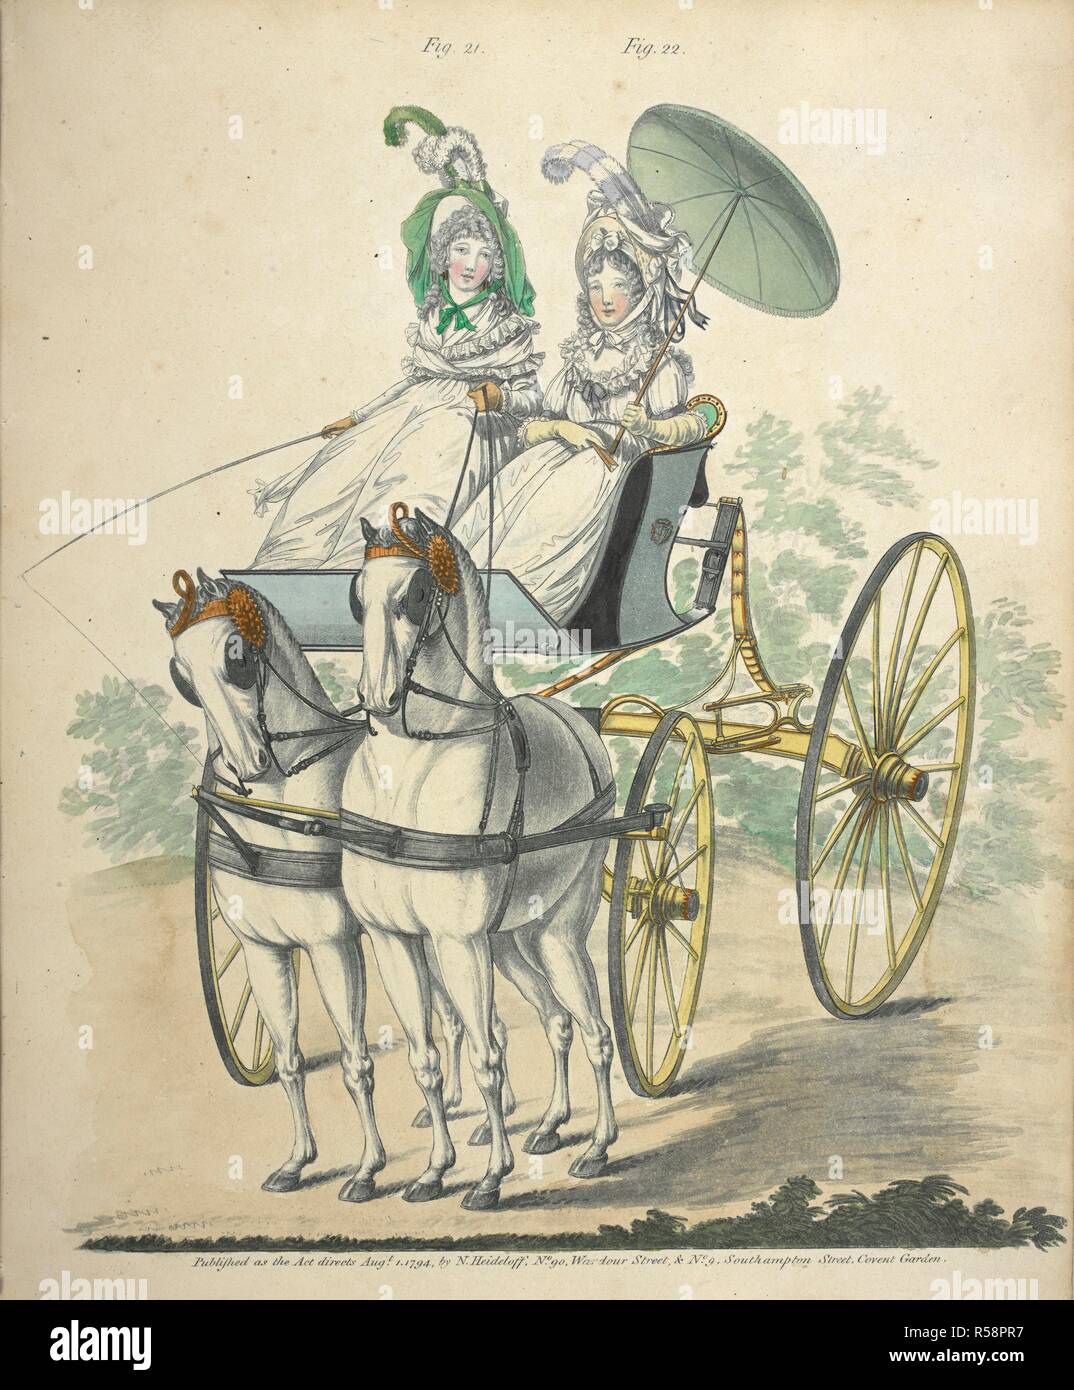 Morning dresses. 'Two Ladies, en neglige, taking an airing in a phaeton.'  They wear plain calico morning dresses and ribbon and feather-trimmed bonnets with ostrich feathers.  Description of the left figure reads: 'Headdress: white stamp- paper hat, trimmed with a green riband and tied down with the same. One green and one yellow feather placed on the left side. Green gauze veil. The hair in small curls; plain chignon. Plain calico morning dress with long sleeves; the petticoat trimmed with a narrow flounce. Plain lawn handkerchief, green sash, lawn cloak trimmed with lace and tied behind, yo Stock Photo